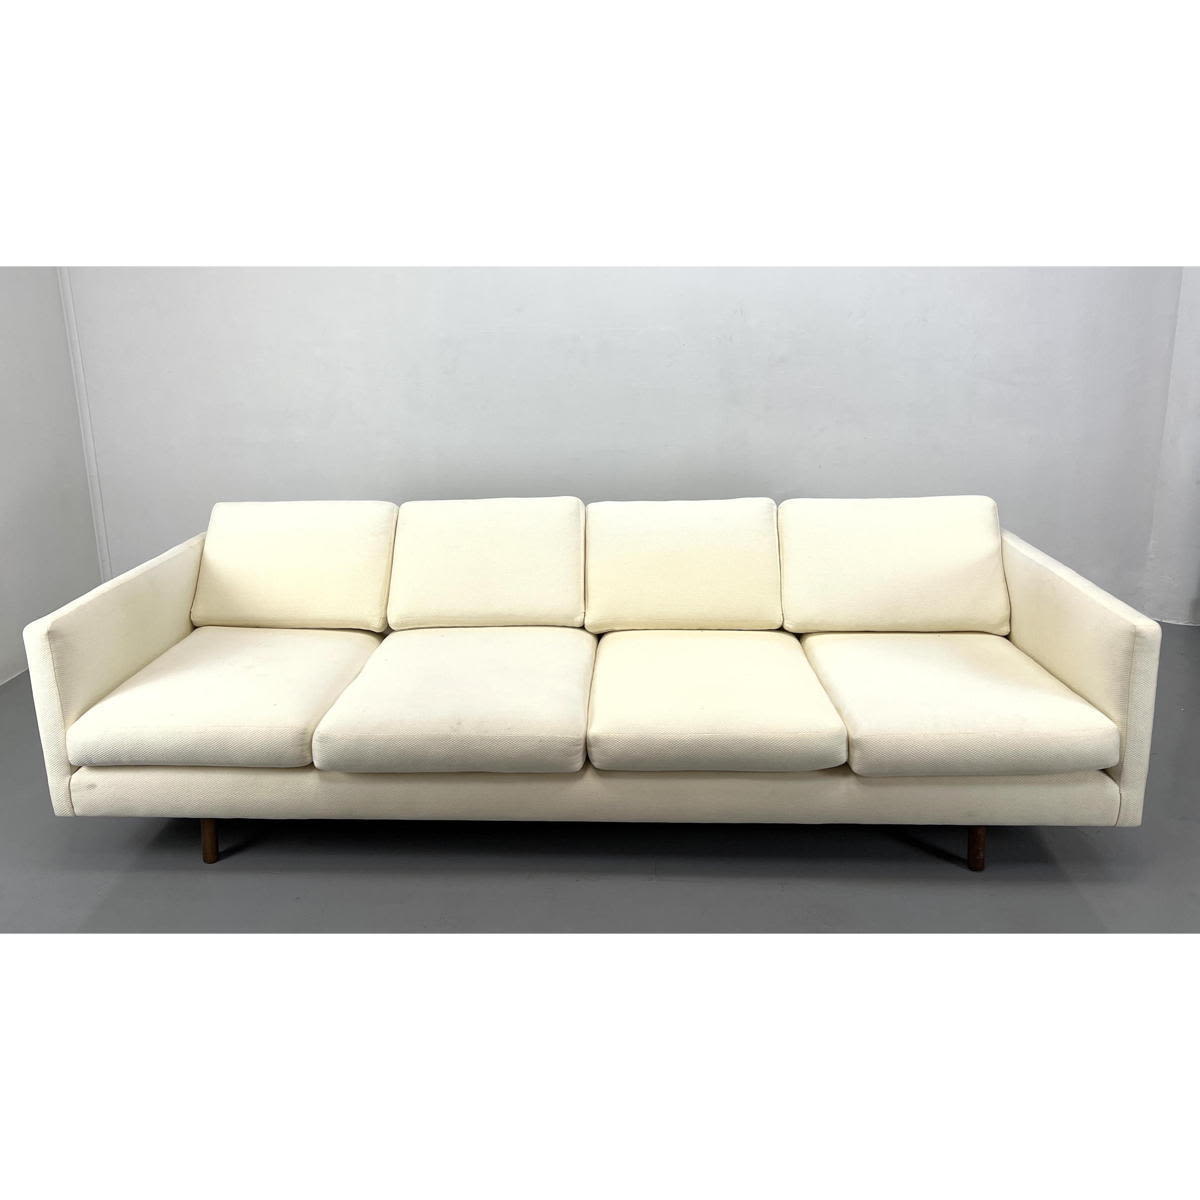 Off white 3 seat sofa couch Harvey 2a7832